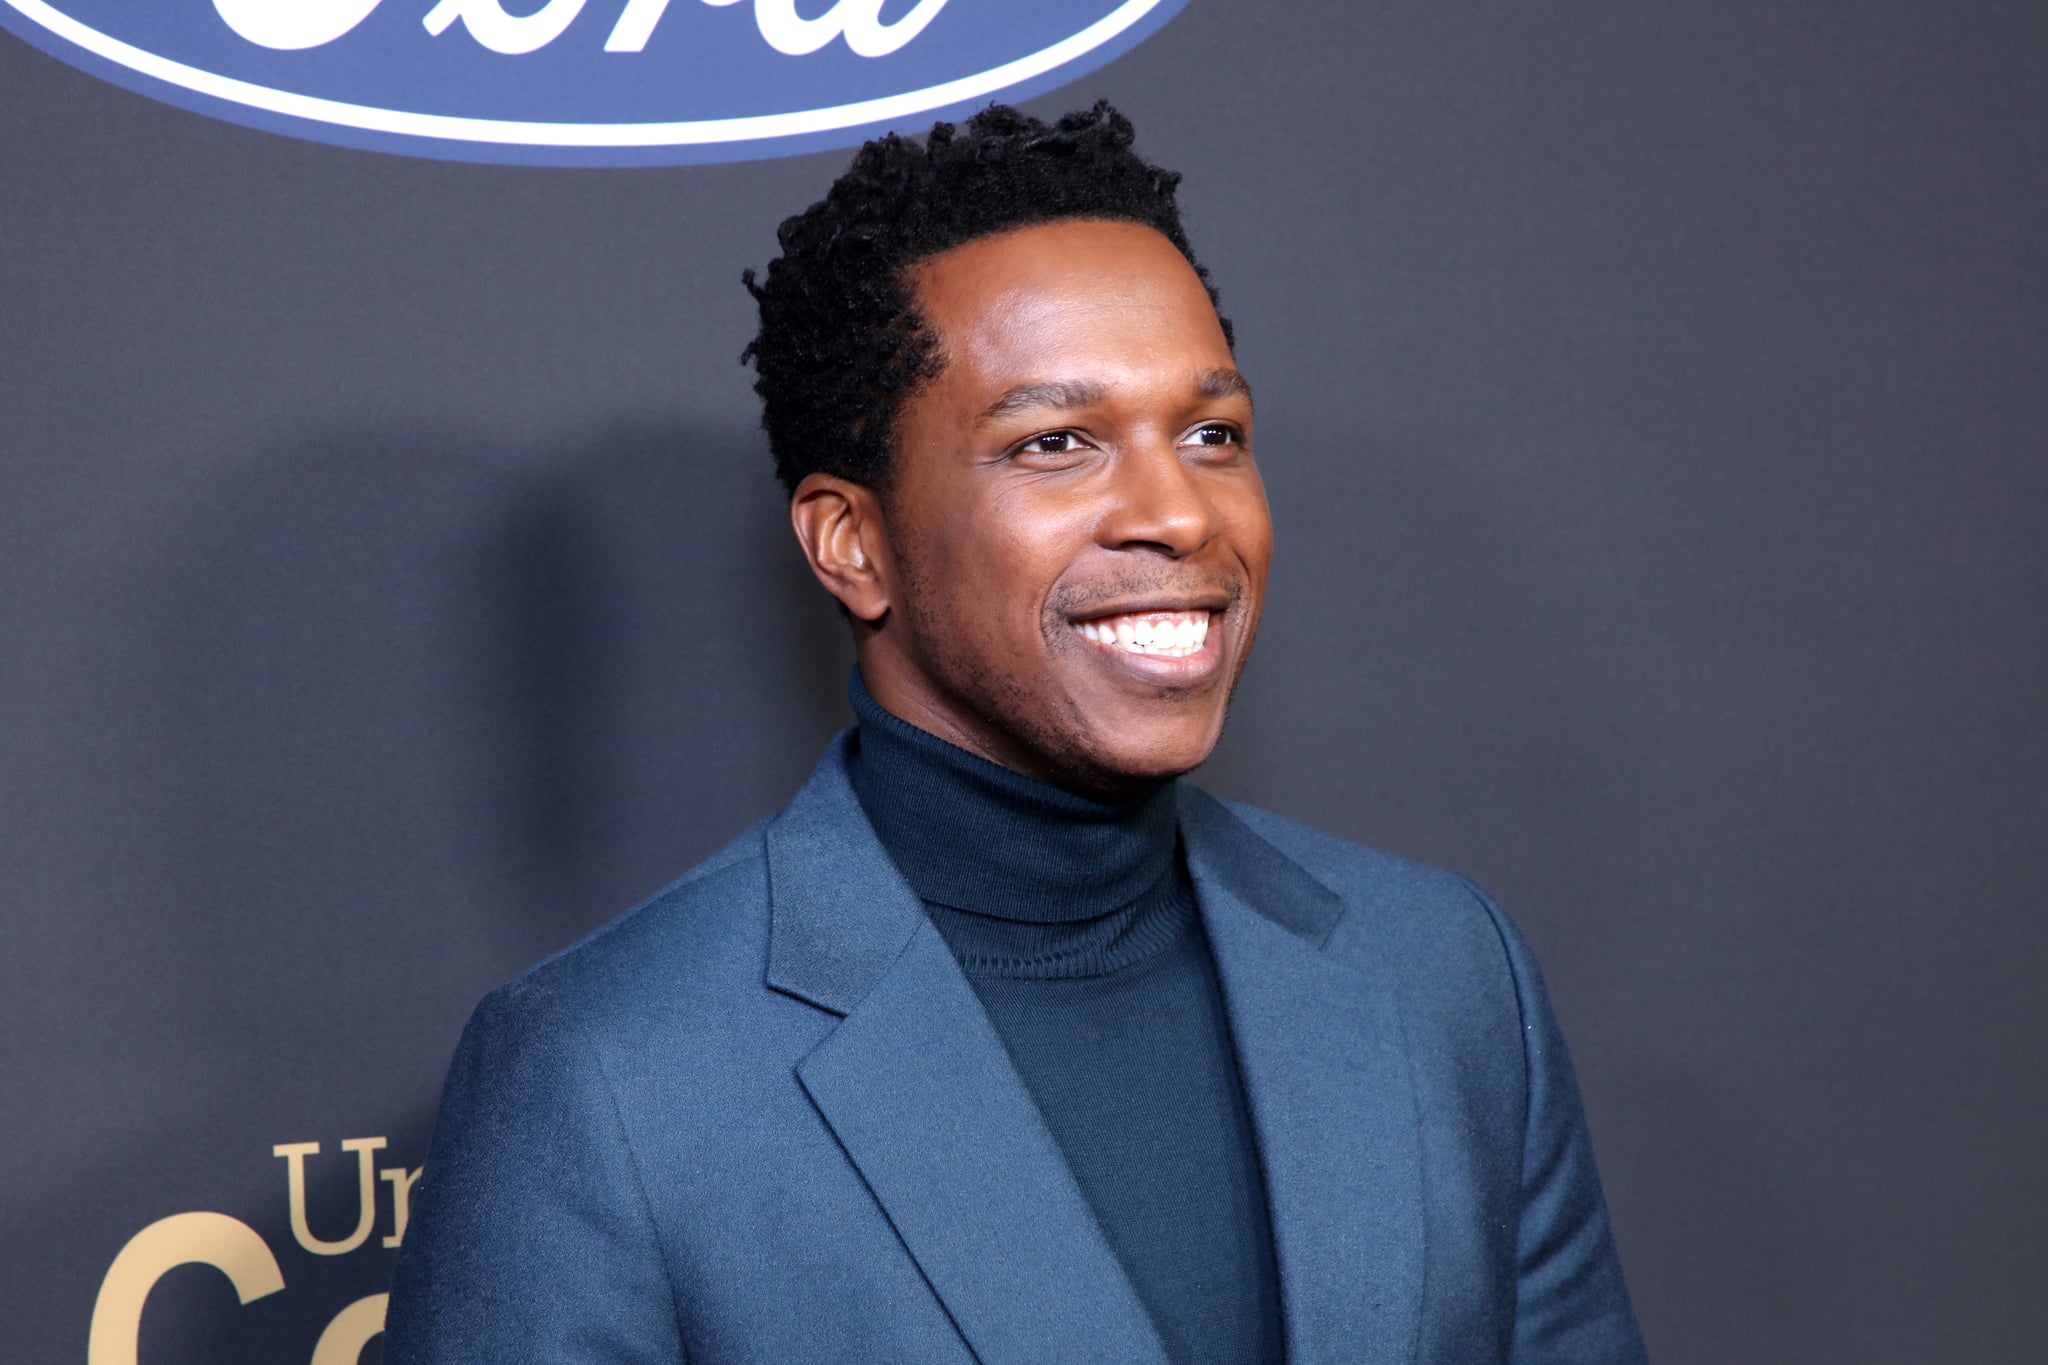 PASADENA, CALIFORNIA - FEBRUARY 22: Leslie Odom Jr. attends the 51st NAACP Image Awards, Presented by BET, at Pasadena Civic Auditorium on February 22, 2020 in Pasadena, California. (Photo by Robin L Marshall/Getty Images for BET)